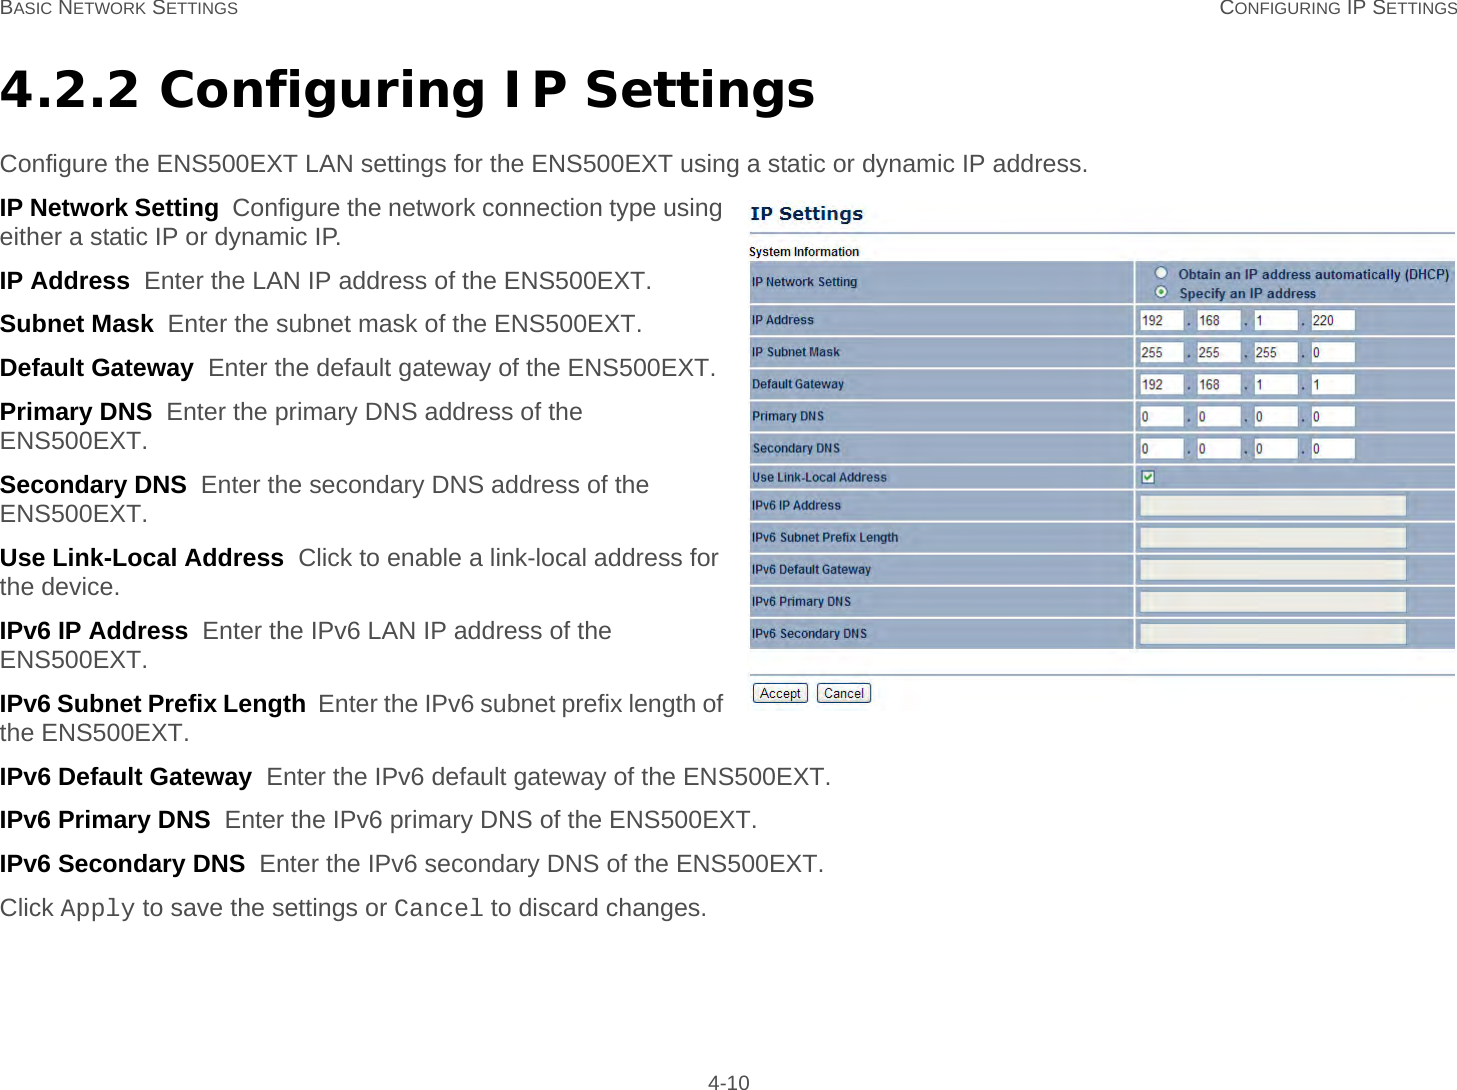 BASIC NETWORK SETTINGS CONFIGURING IP SETTINGS 4-104.2.2 Configuring IP SettingsConfigure the ENS500EXT LAN settings for the ENS500EXT using a static or dynamic IP address.IP Network Setting  Configure the network connection type using either a static IP or dynamic IP.IP Address  Enter the LAN IP address of the ENS500EXT.Subnet Mask  Enter the subnet mask of the ENS500EXT.Default Gateway  Enter the default gateway of the ENS500EXT.Primary DNS  Enter the primary DNS address of the ENS500EXT.Secondary DNS  Enter the secondary DNS address of the ENS500EXT.Use Link-Local Address  Click to enable a link-local address for the device.IPv6 IP Address  Enter the IPv6 LAN IP address of the ENS500EXT.IPv6 Subnet Prefix Length  Enter the IPv6 subnet prefix length of the ENS500EXT.IPv6 Default Gateway  Enter the IPv6 default gateway of the ENS500EXT.IPv6 Primary DNS  Enter the IPv6 primary DNS of the ENS500EXT.IPv6 Secondary DNS  Enter the IPv6 secondary DNS of the ENS500EXT.Click Apply to save the settings or Cancel to discard changes.